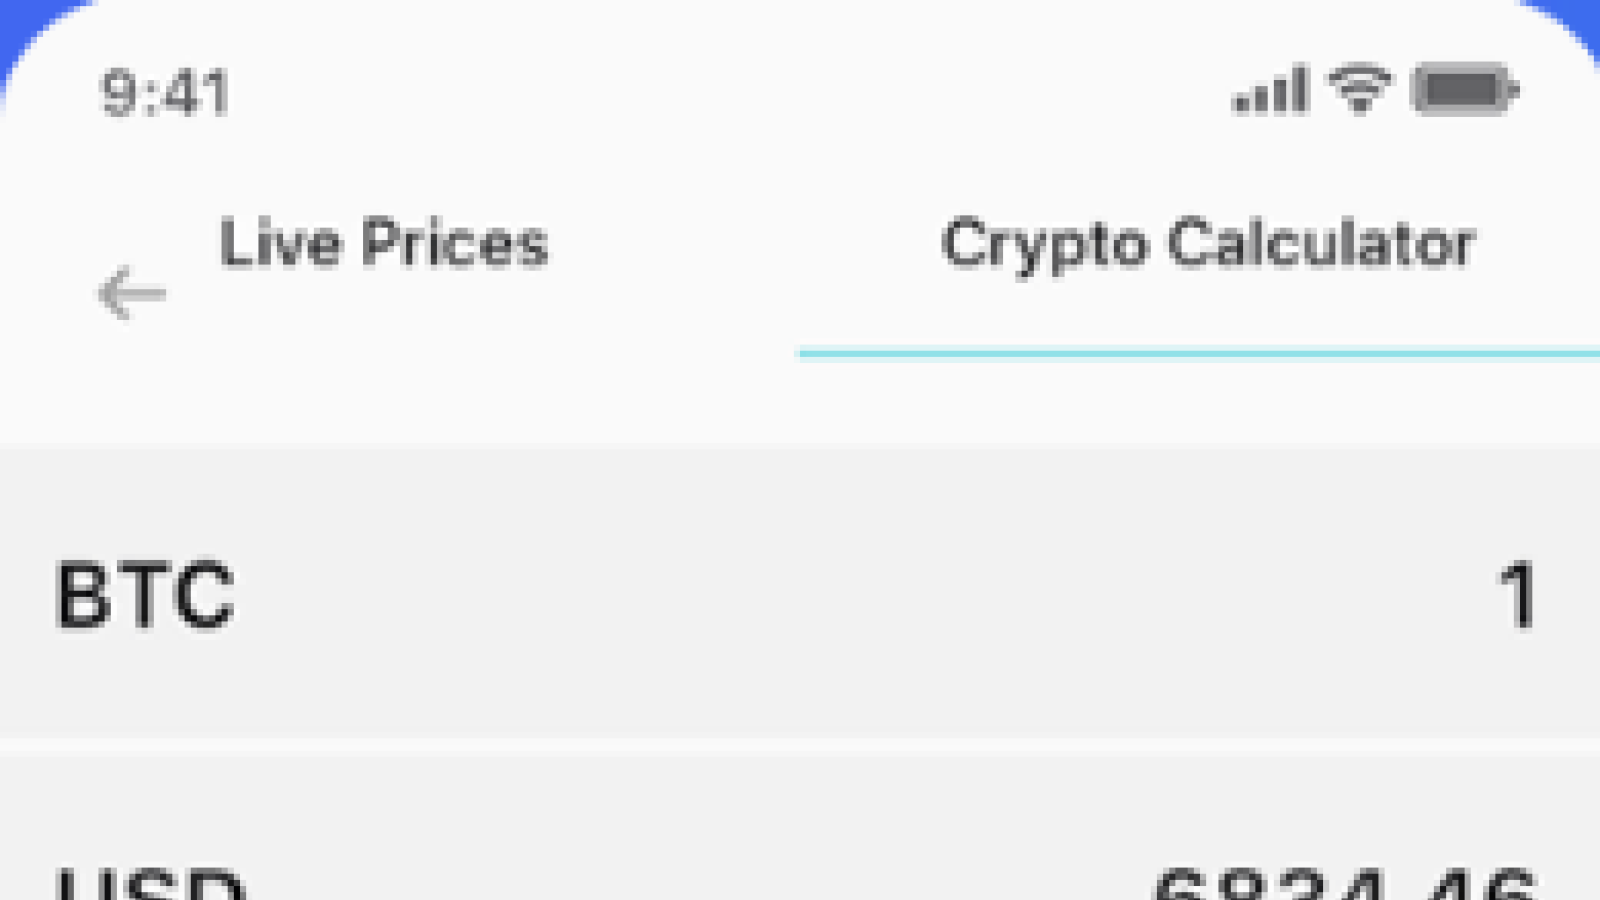 An in-app crypto-to-fiat calculator can help users calculate prices both in fiat money and in cryptocurrency.